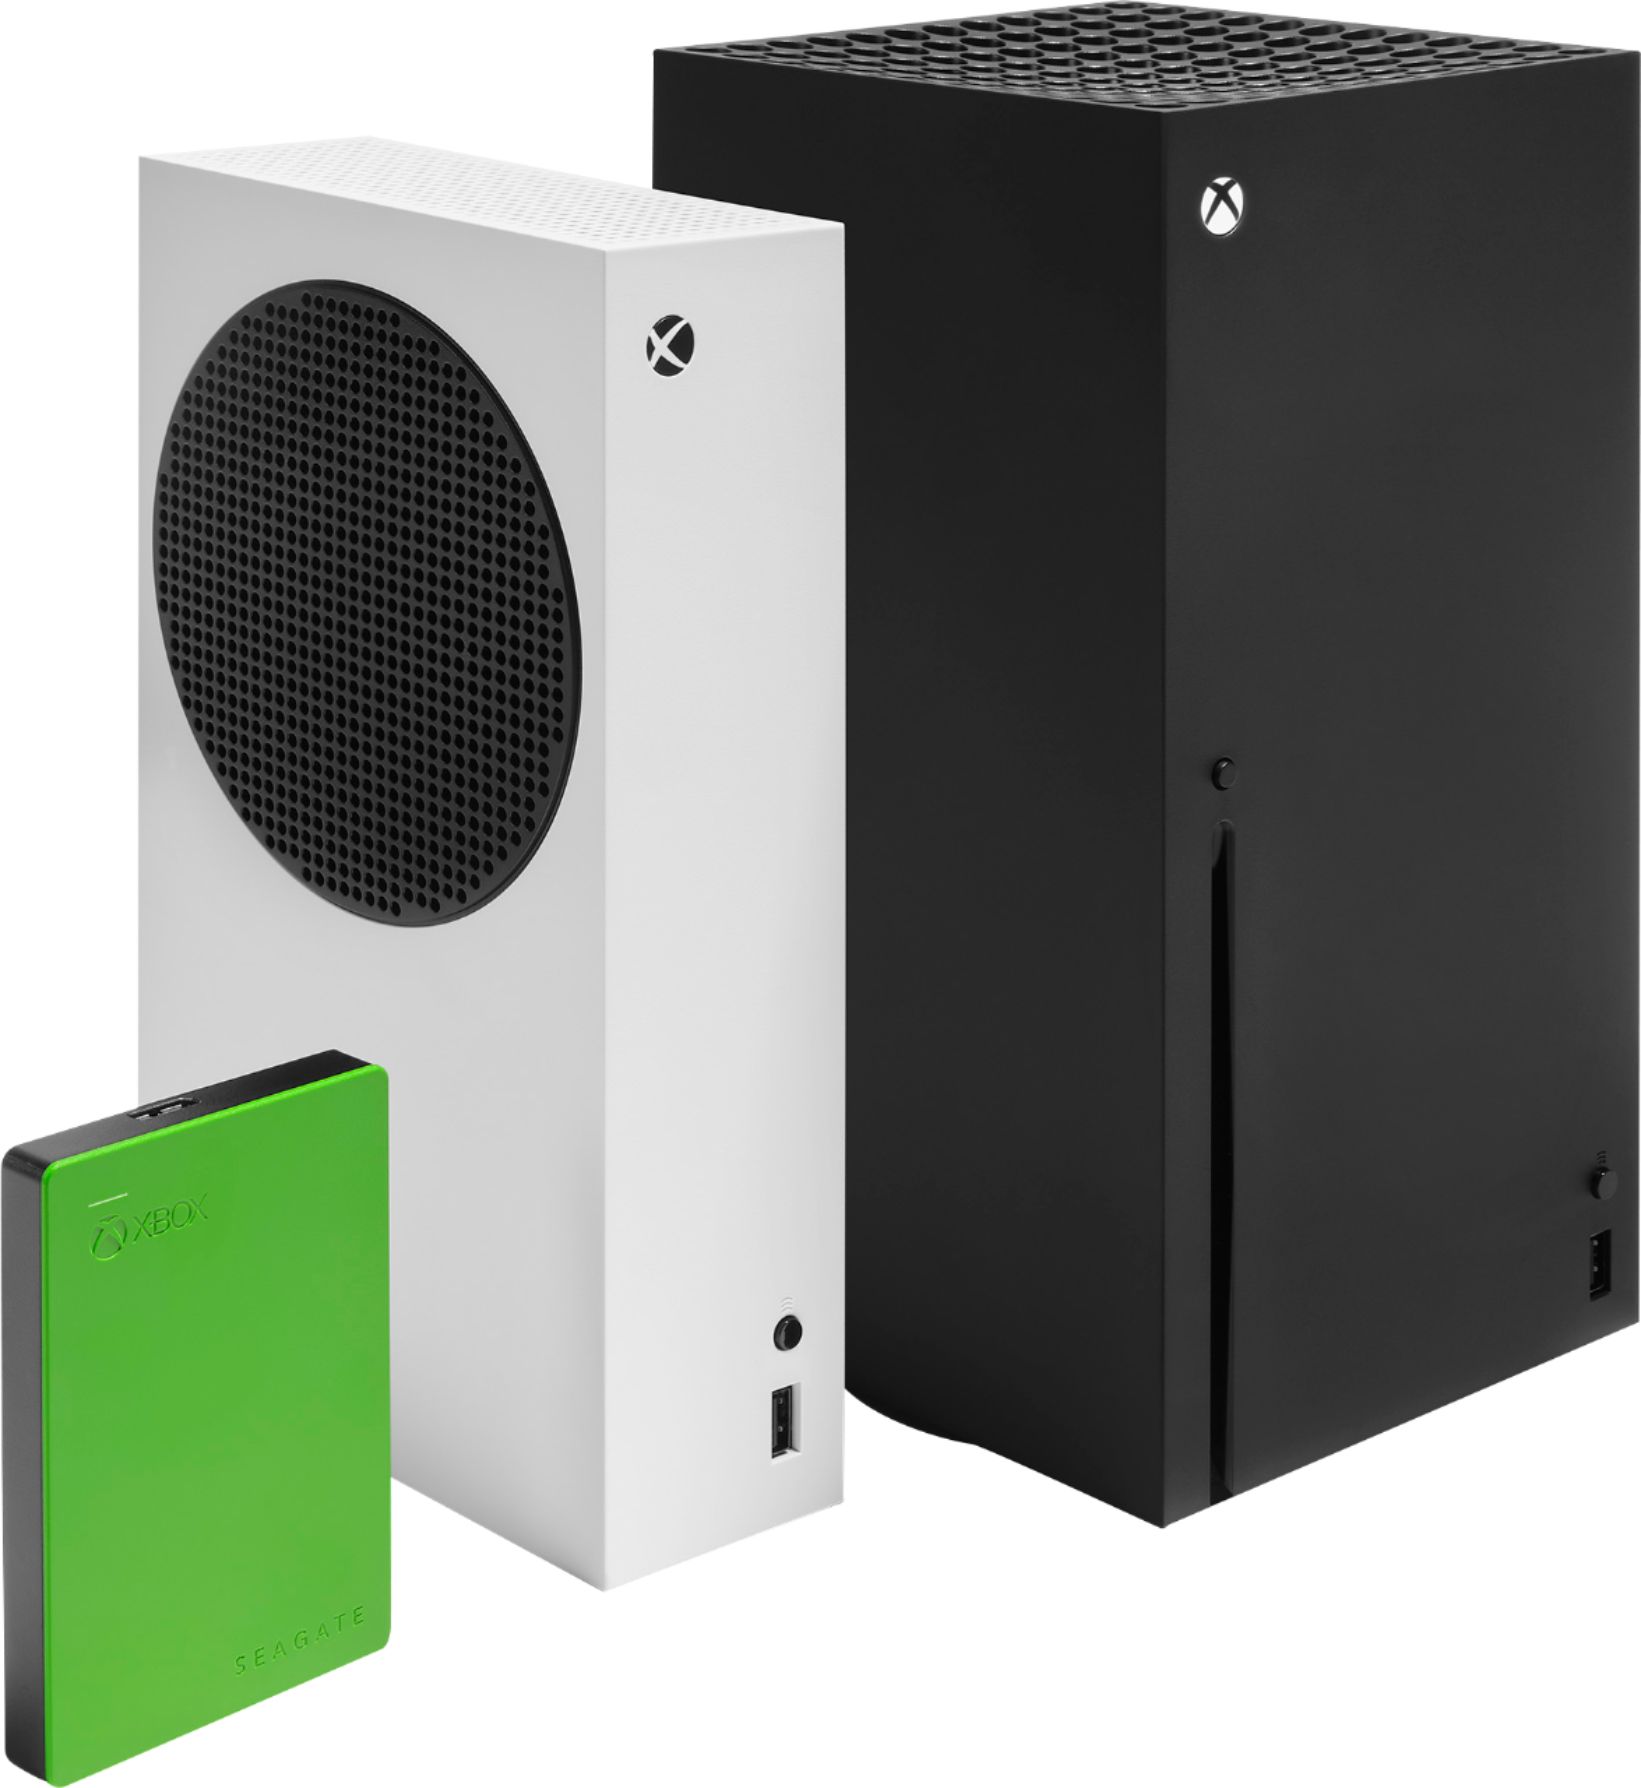 Seagate Game Drive 4Tb Green - Xbox One accessories - LDLC 3-year warranty